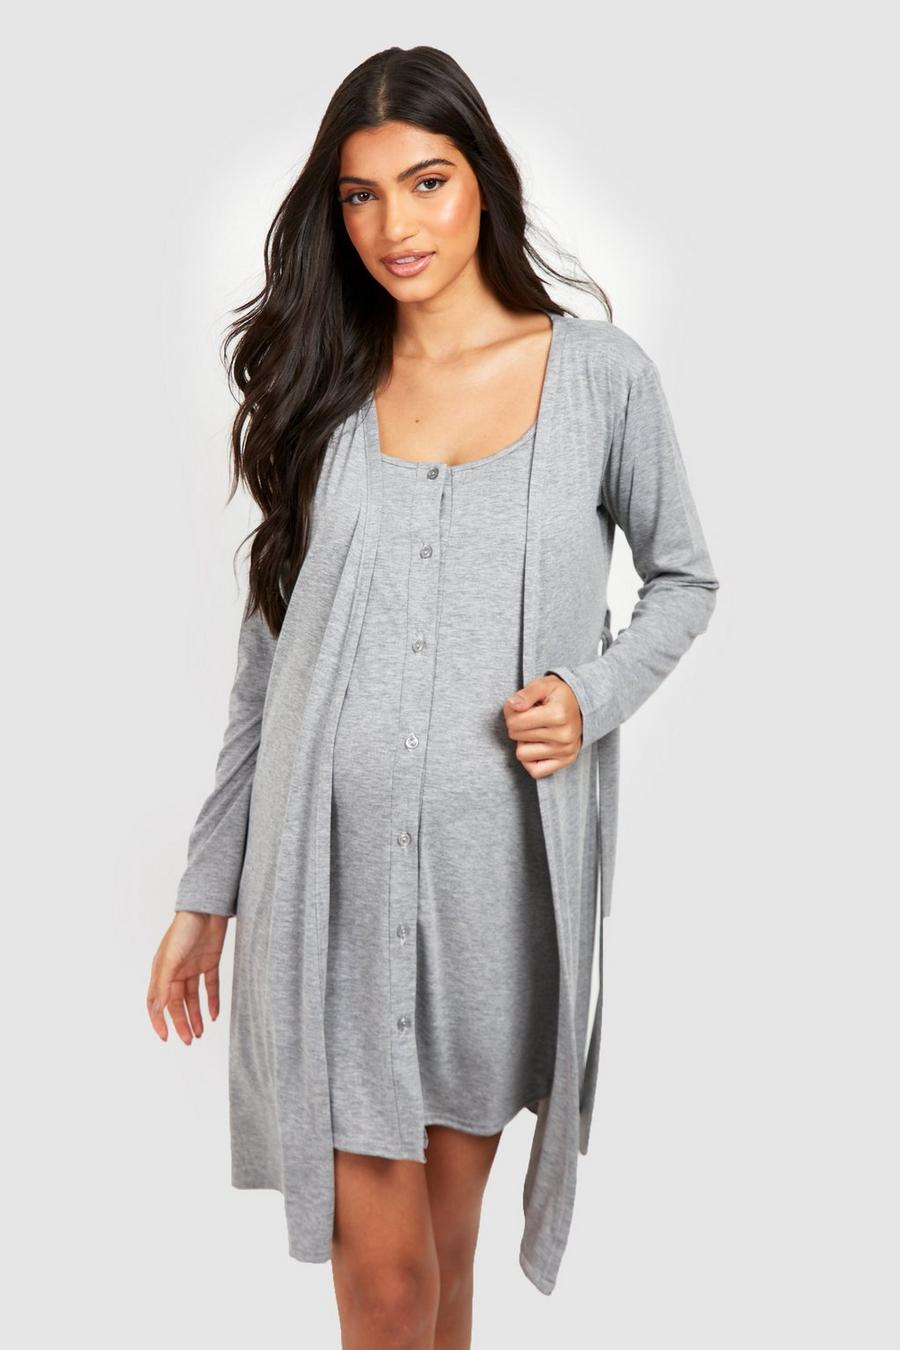 Grey marl Maternity Button Front Nightie And Robe